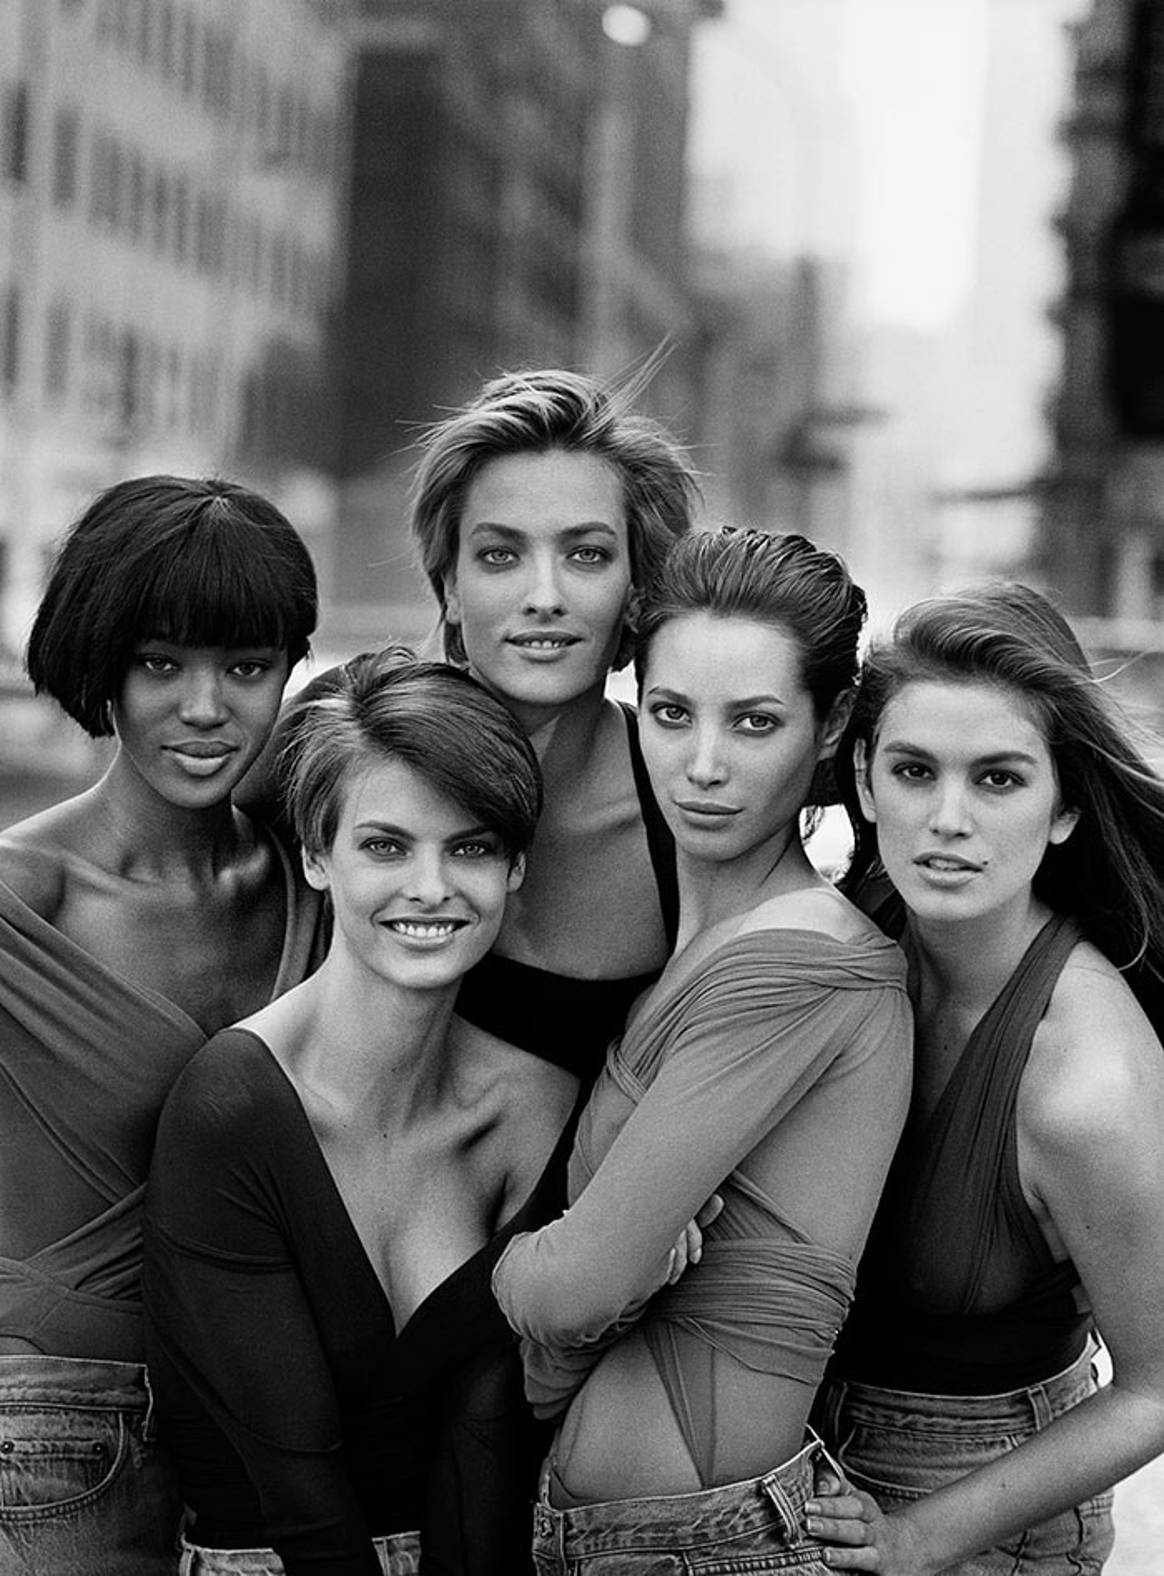 Peter Lindbergh redefines beauty in: ‘A Different Vision on Fashion Photography’